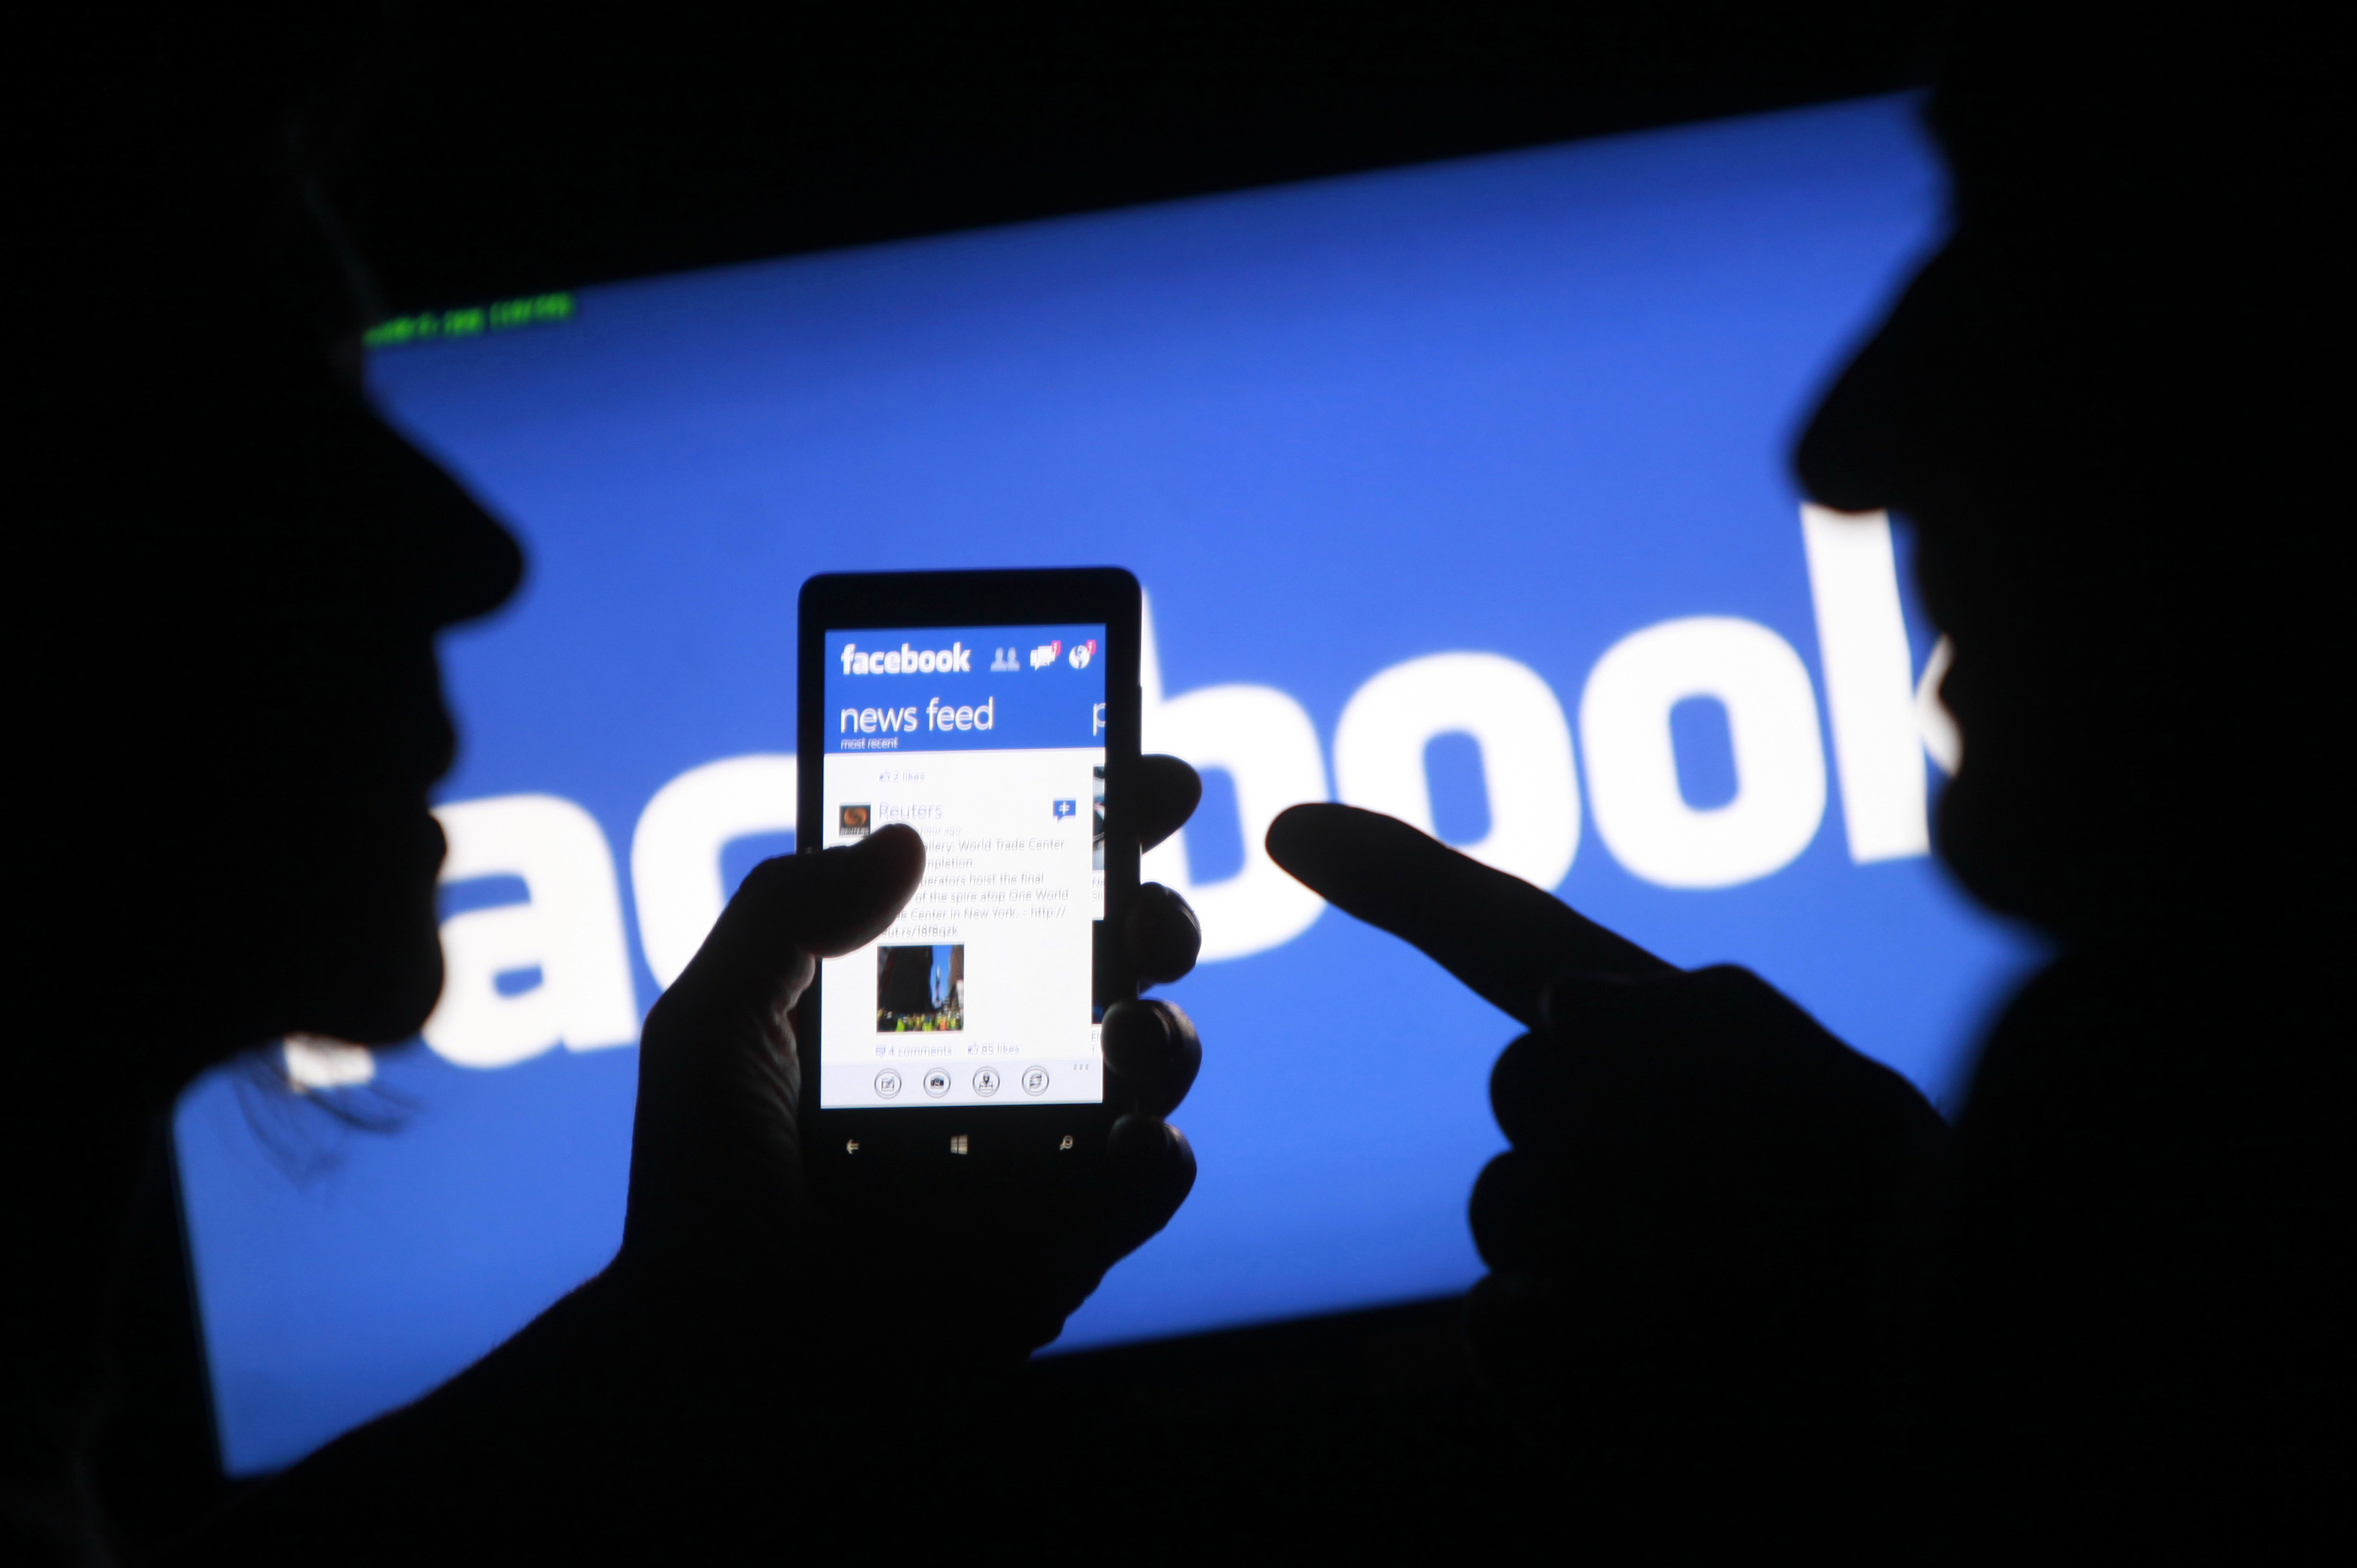 A smartphone user shows the Facebook application on his phone in the central Bosnian town of Zenica, in this photo illustration, May 2, 2013. 
Facebook Inc's mobile advertising revenue growth gained momentum in the first three months of the year as the social network sold more ads to users on smartphones and tablets, partially offsetting higher spending which weighed on profits. REUTERS/Dado Ruvic (BOSNIA AND HERZEGOVINA - Tags: SOCIETY SCIENCE TECHNOLOGY BUSINESS) - RTXZ81K